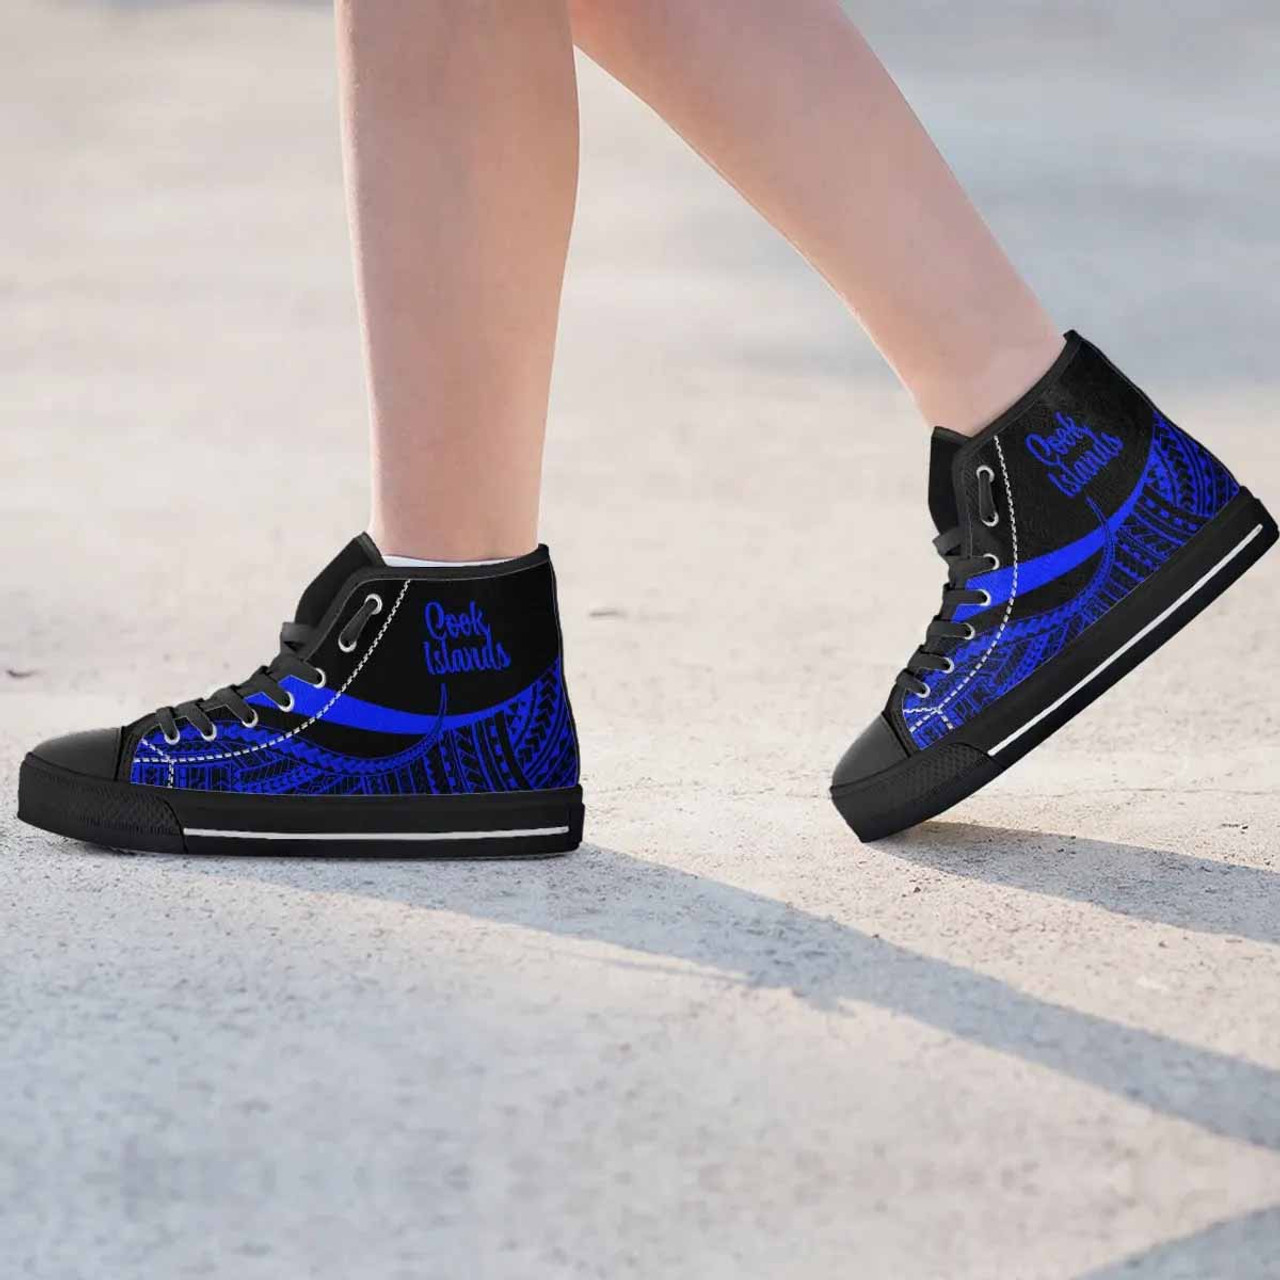 Cook Islands High Top Shoes Blue - Polynesian Tentacle Tribal Pattern 2